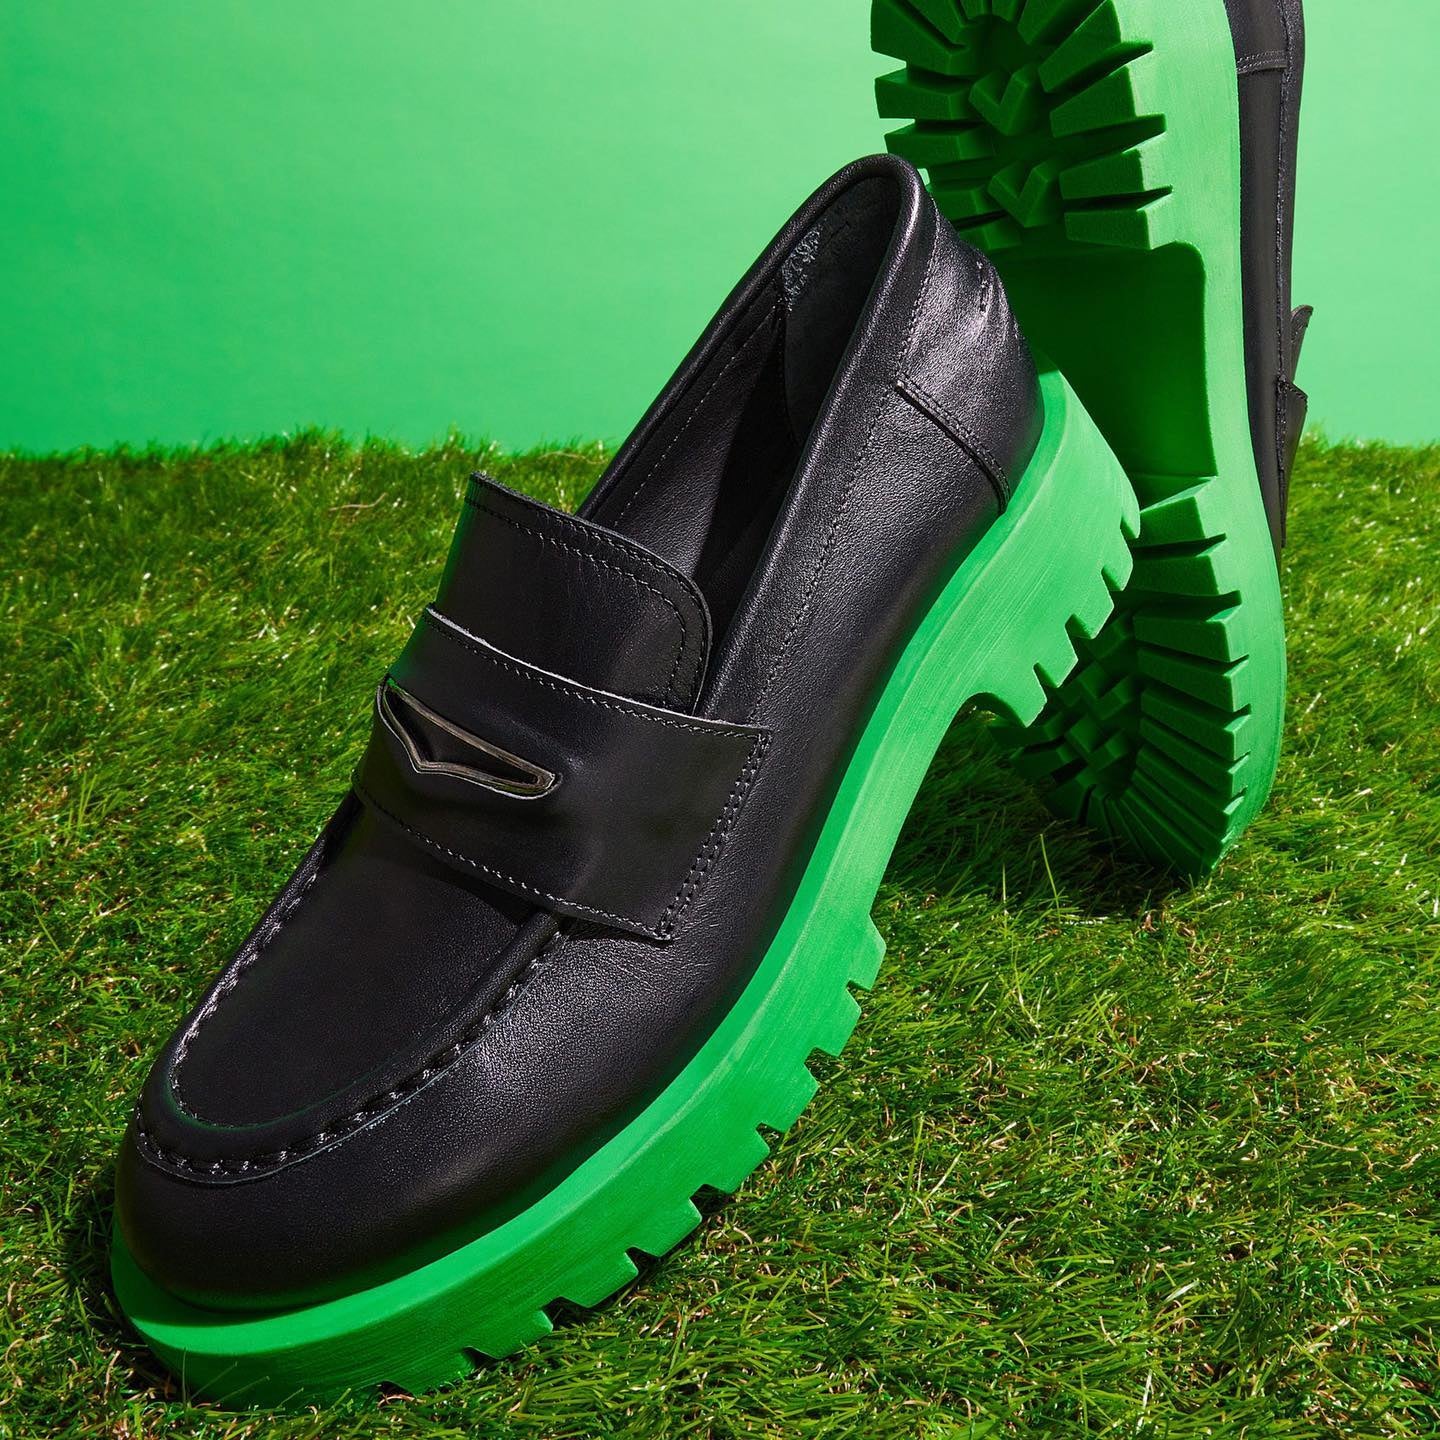 black loafers with green soles and small one inch heel